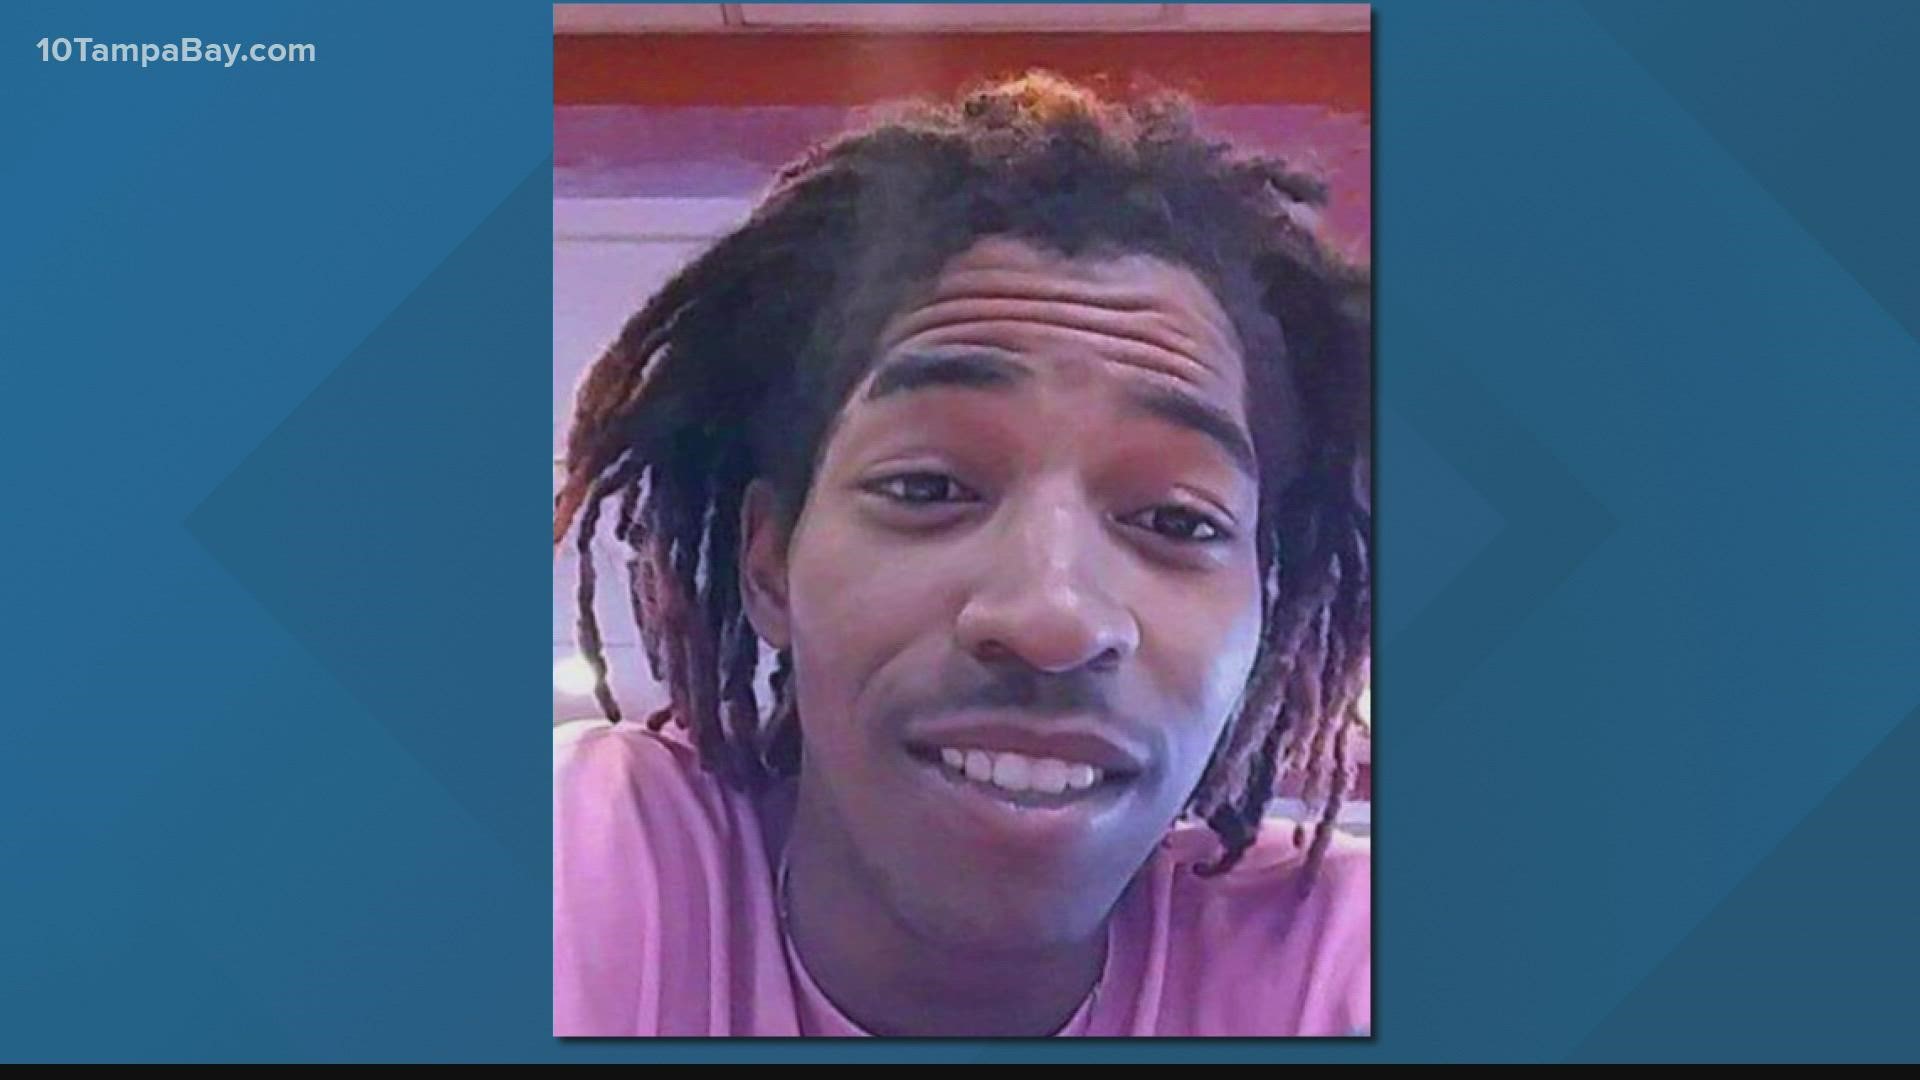 Someone shot and killed 21-year-old Darnell Powell as he slept in his bed.